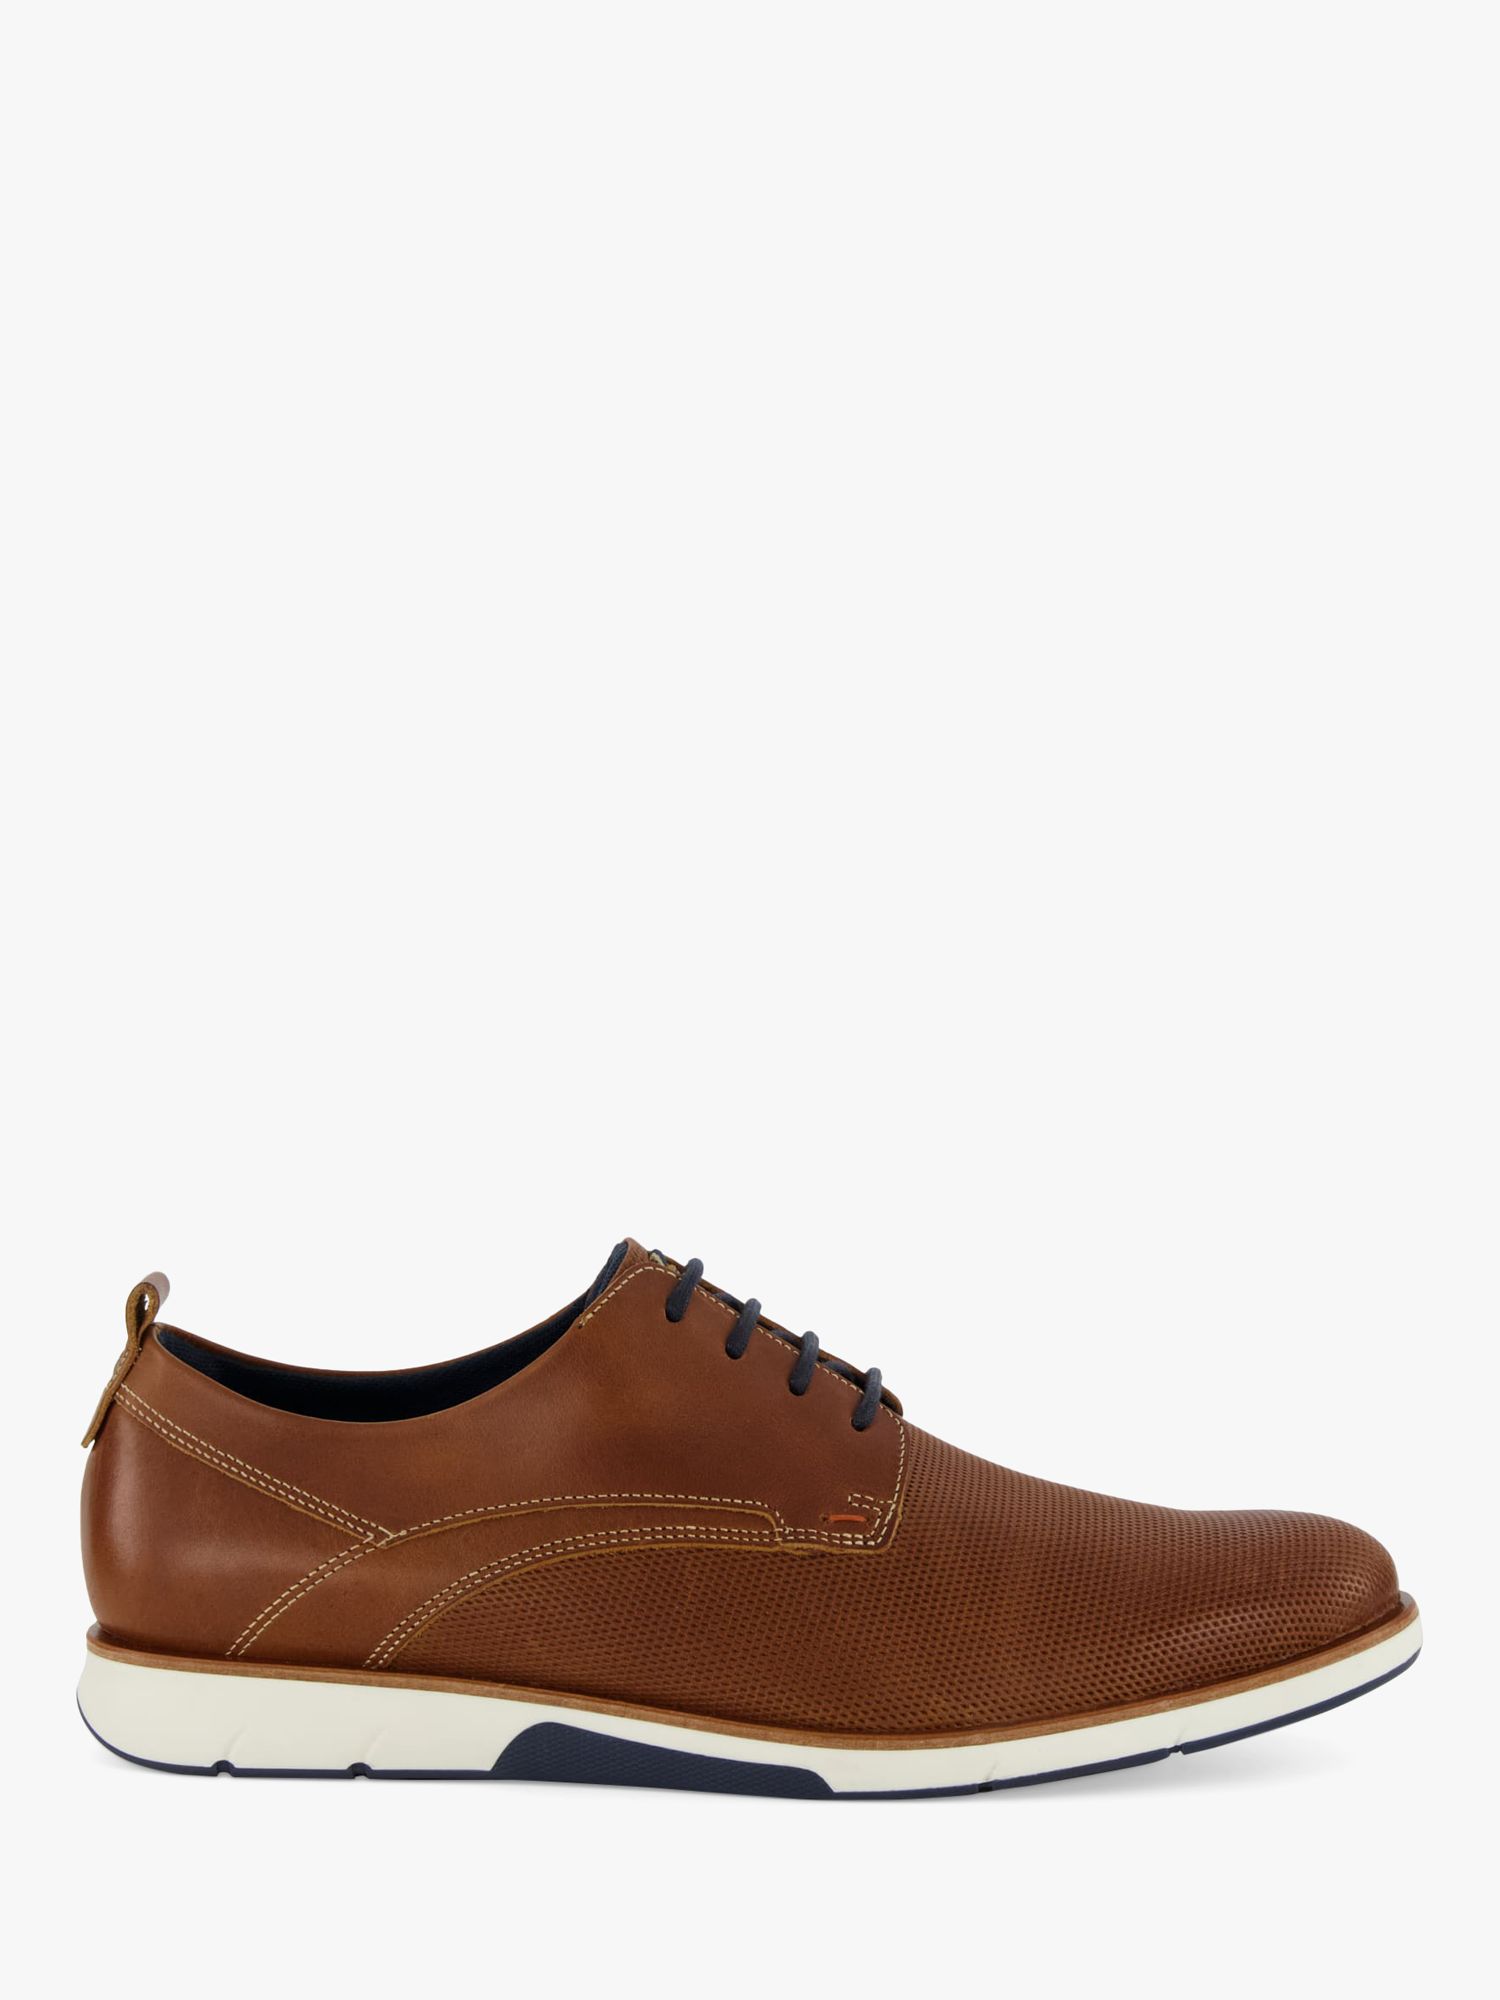 Dune Barnabey Plain Wedge Leather Shoes, Tan at John Lewis & Partners